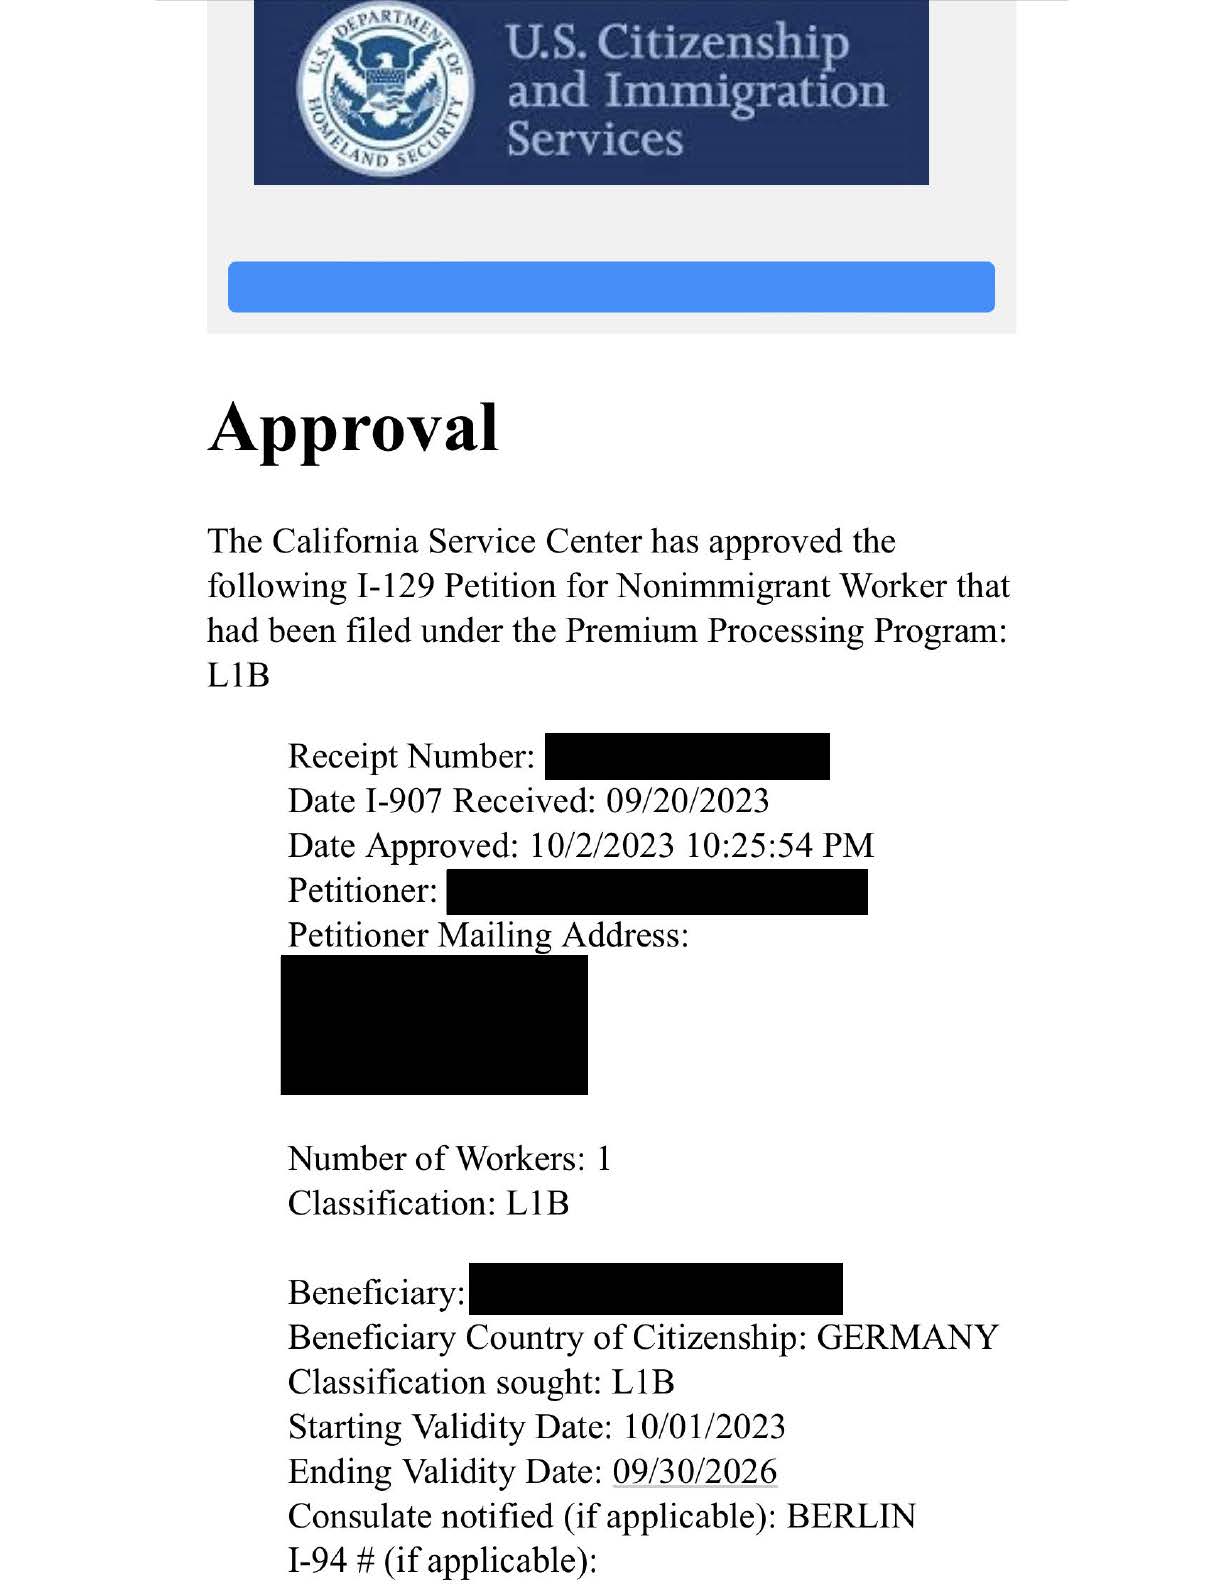 L-1B Petition approved for a specialized knowledge employee from germany